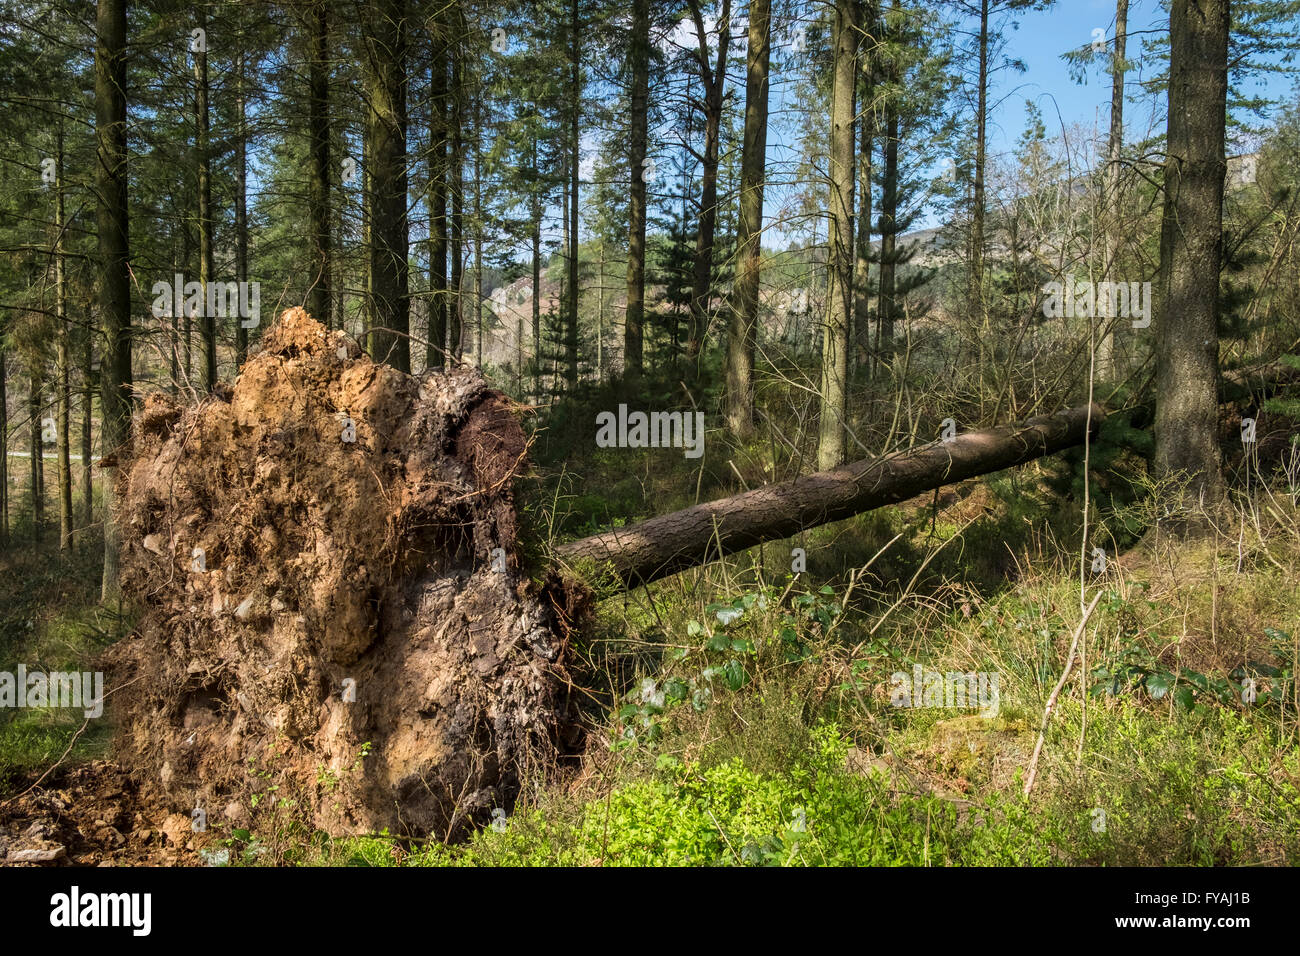 Uprooted pine tree (Pinus, family Pinaceae) with roots exposed, Tan Y Bwlch, Gwynedd, Wales, UK Stock Photo